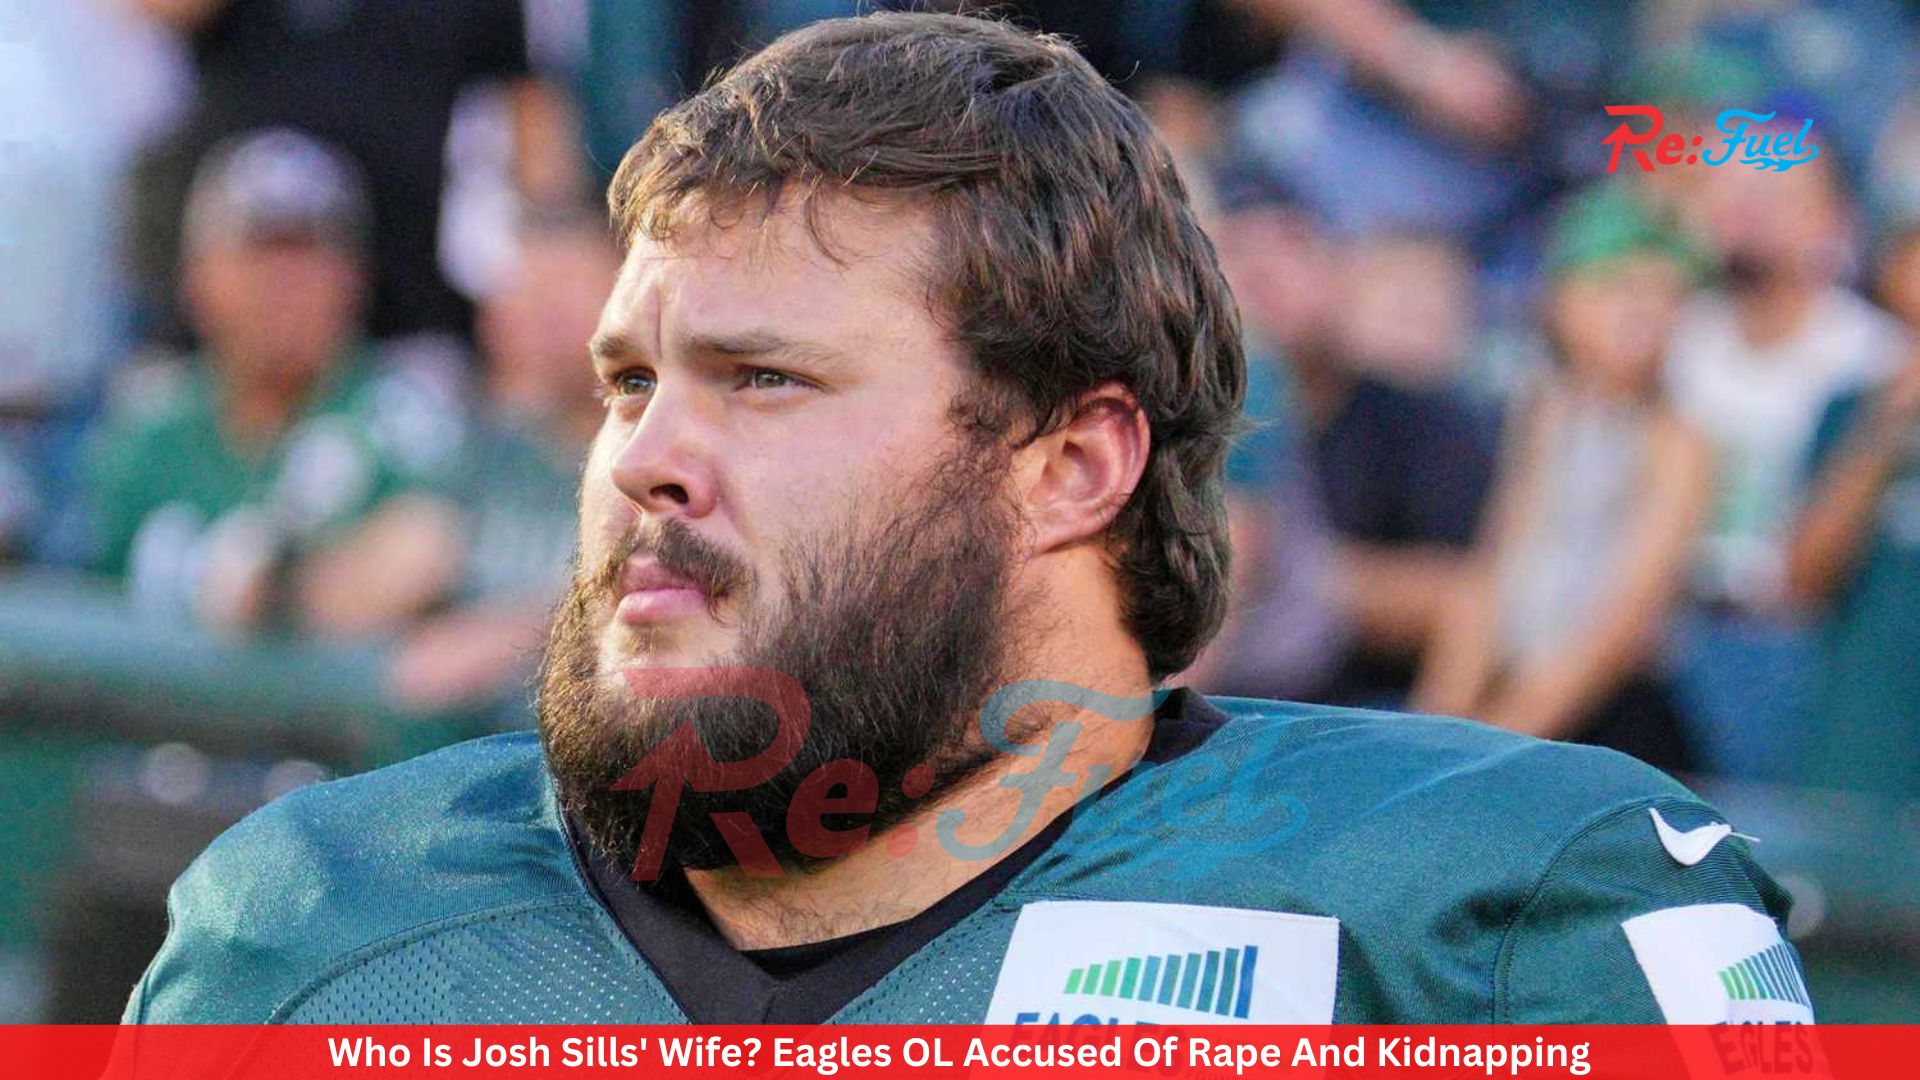 Who Is Josh Sills' Wife? Eagles OL Accused Of Rape And Kidnapping